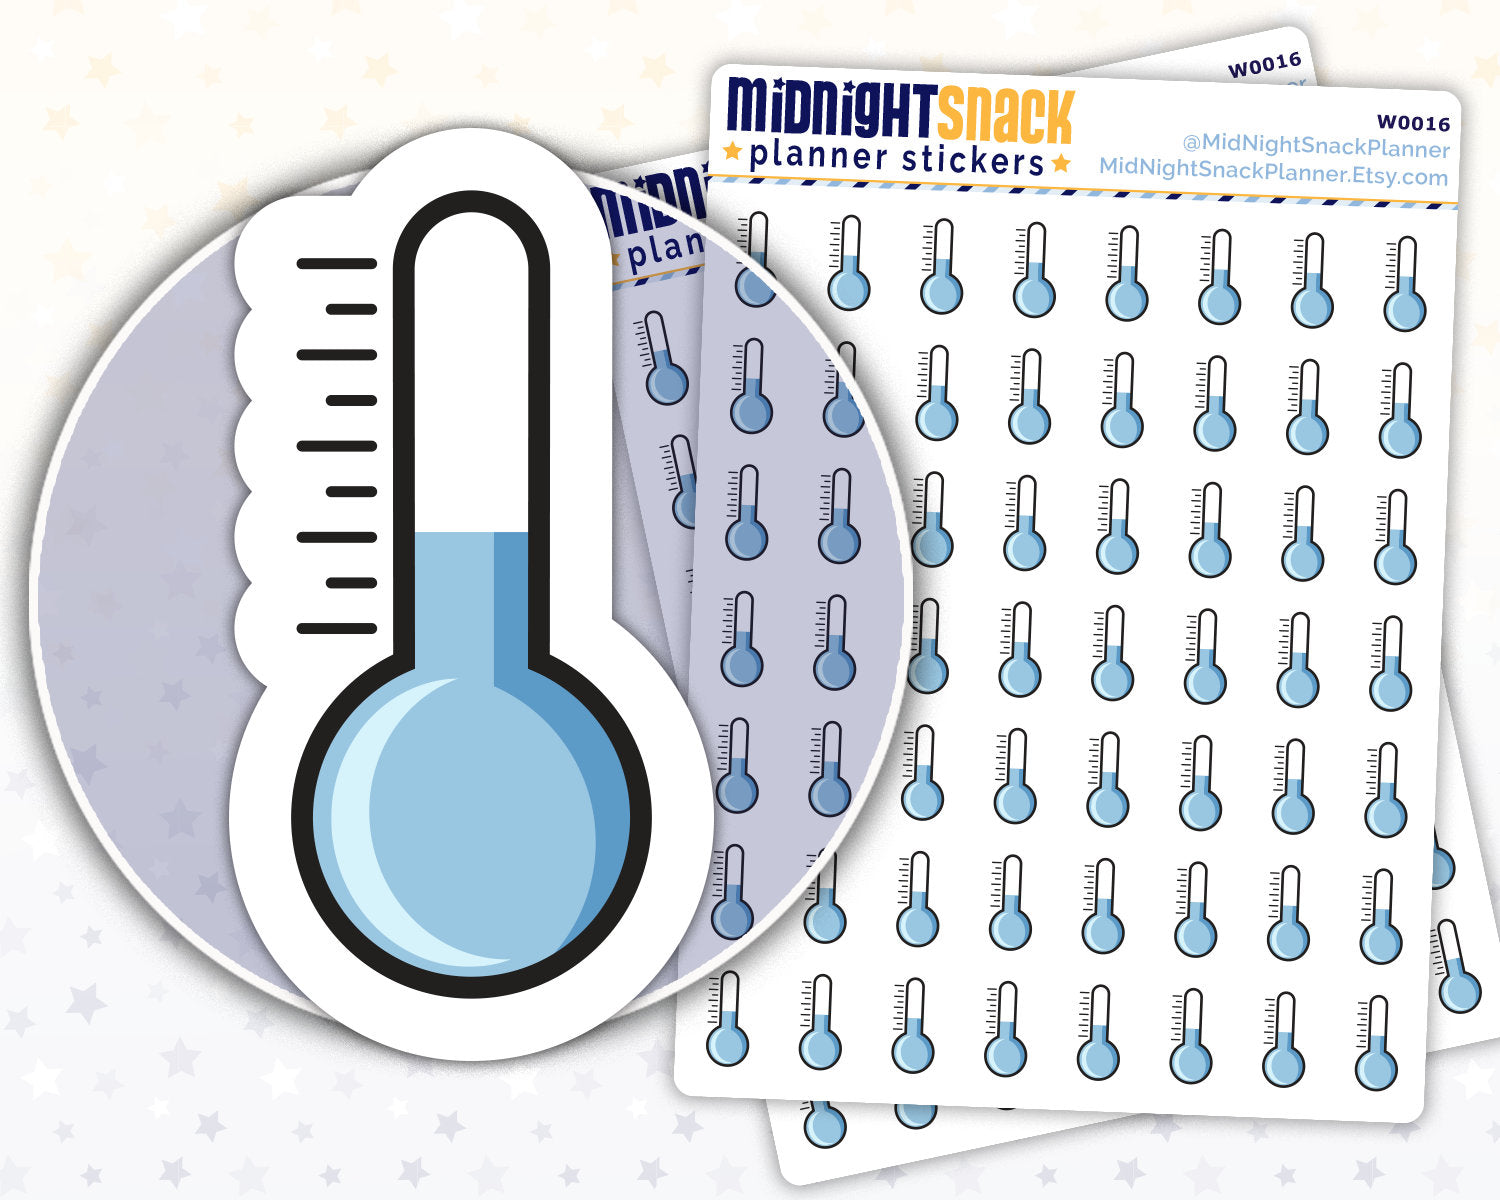 Cold Temperature Thermometer Icon: Weather Planner Sticker Midnight Snack Planner